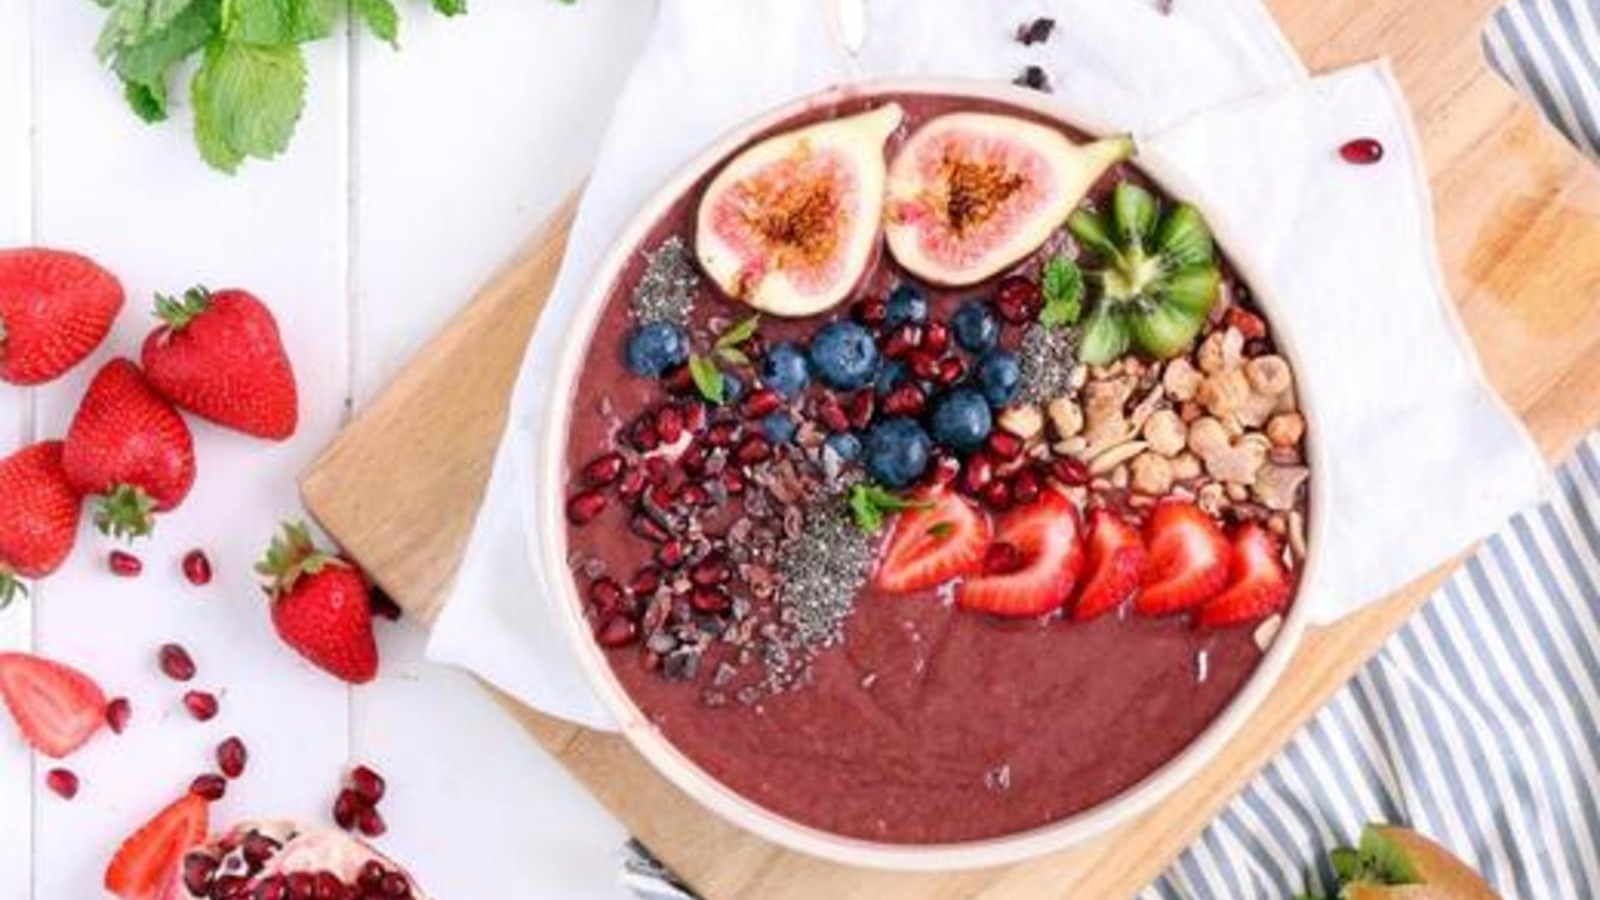 Image of Pear, Peach and Acai Smoothie Bowl